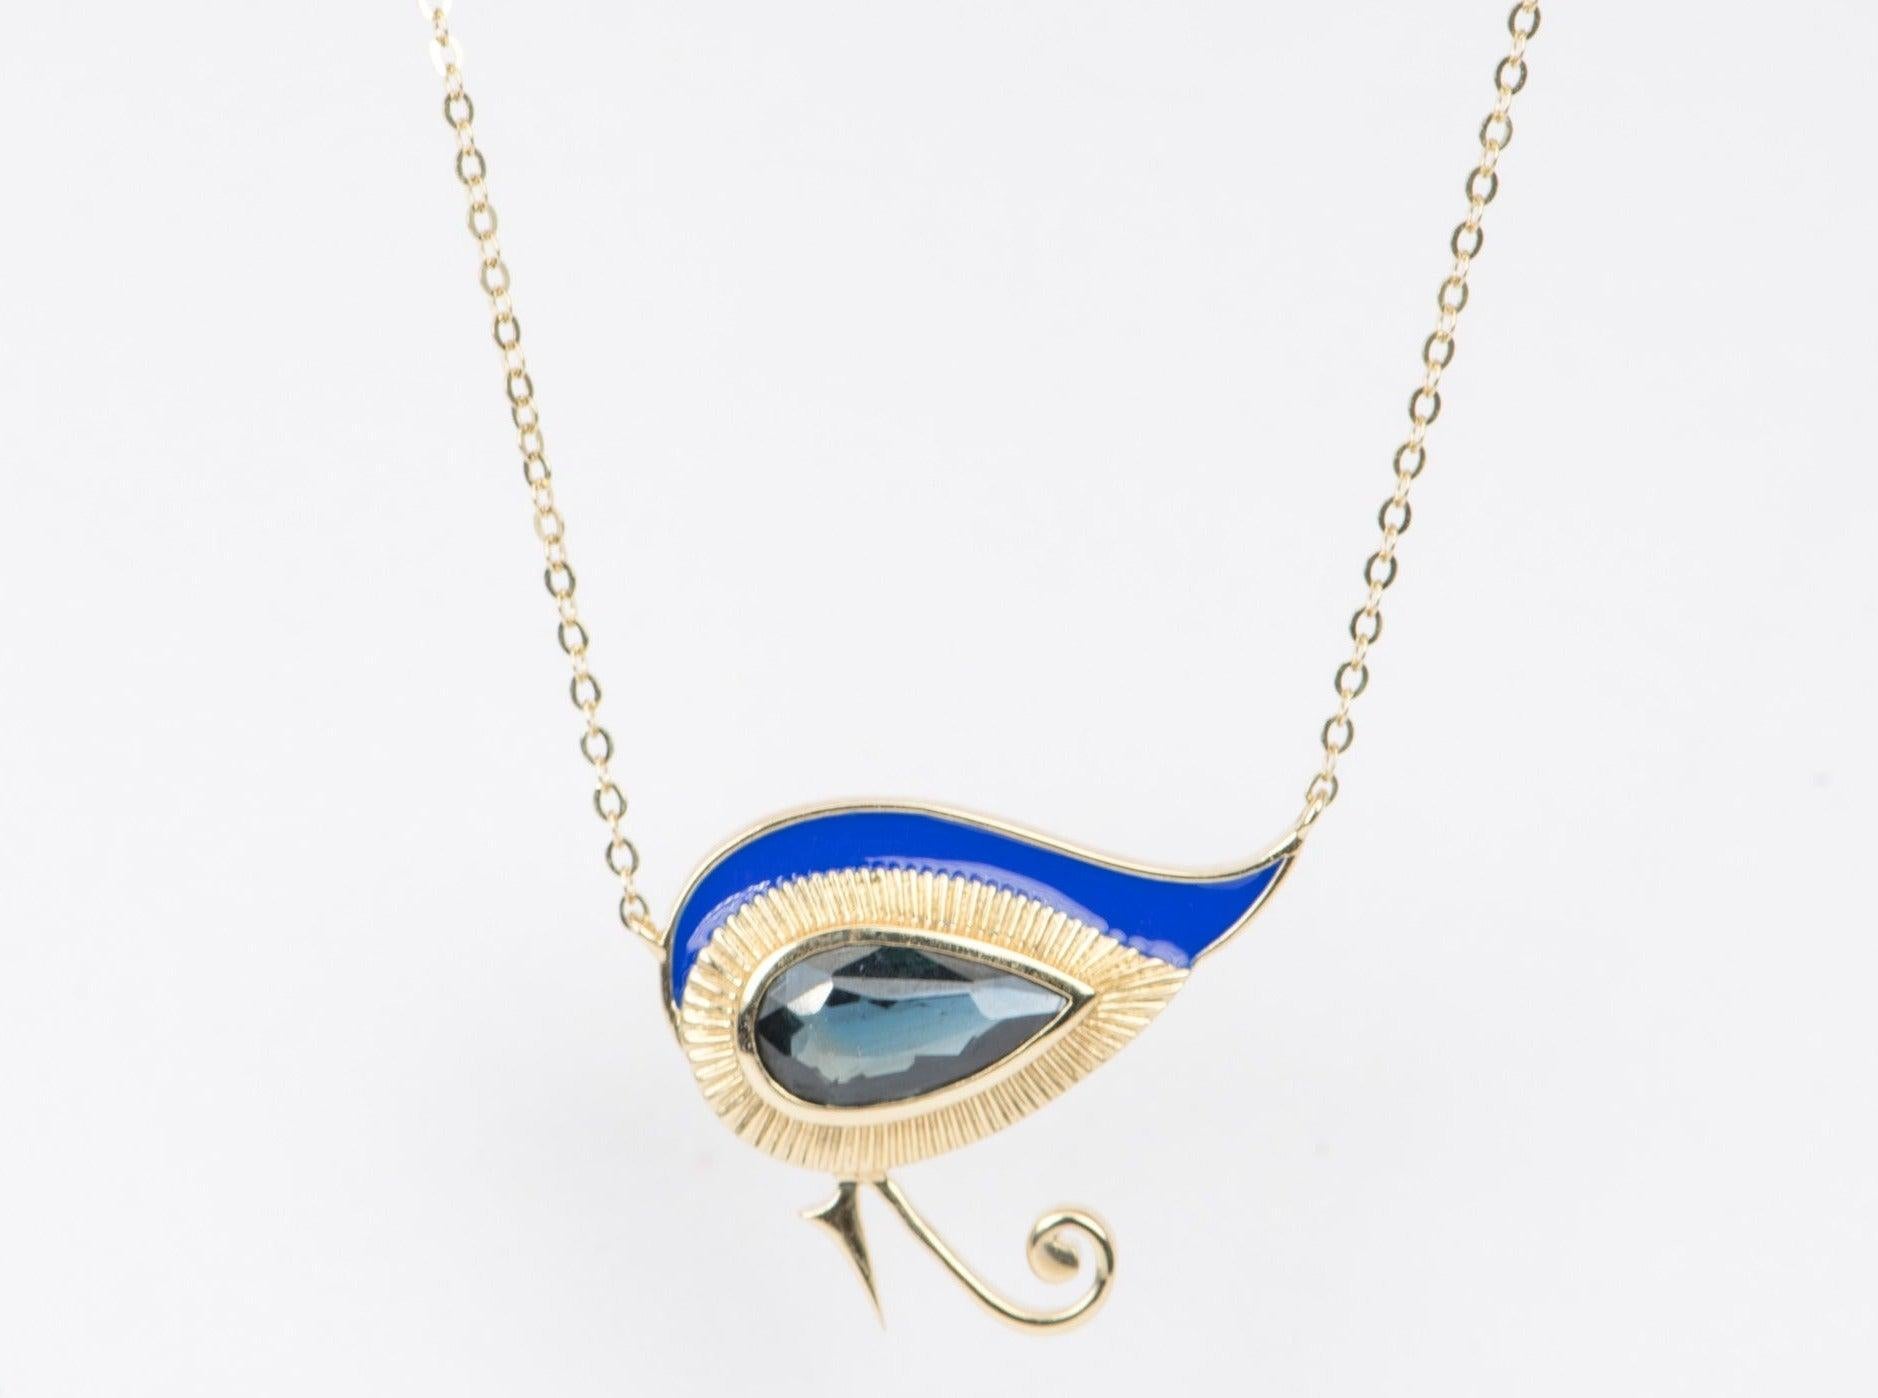 ♥ Eye of Horus Pear Shaped Sapphire 14K Yellow Gold Necklace with bright blue enamel
♥ The item measures 19.2mm in length, 23mm in width, and stands 3.5mm from the finger. The necklace is 17